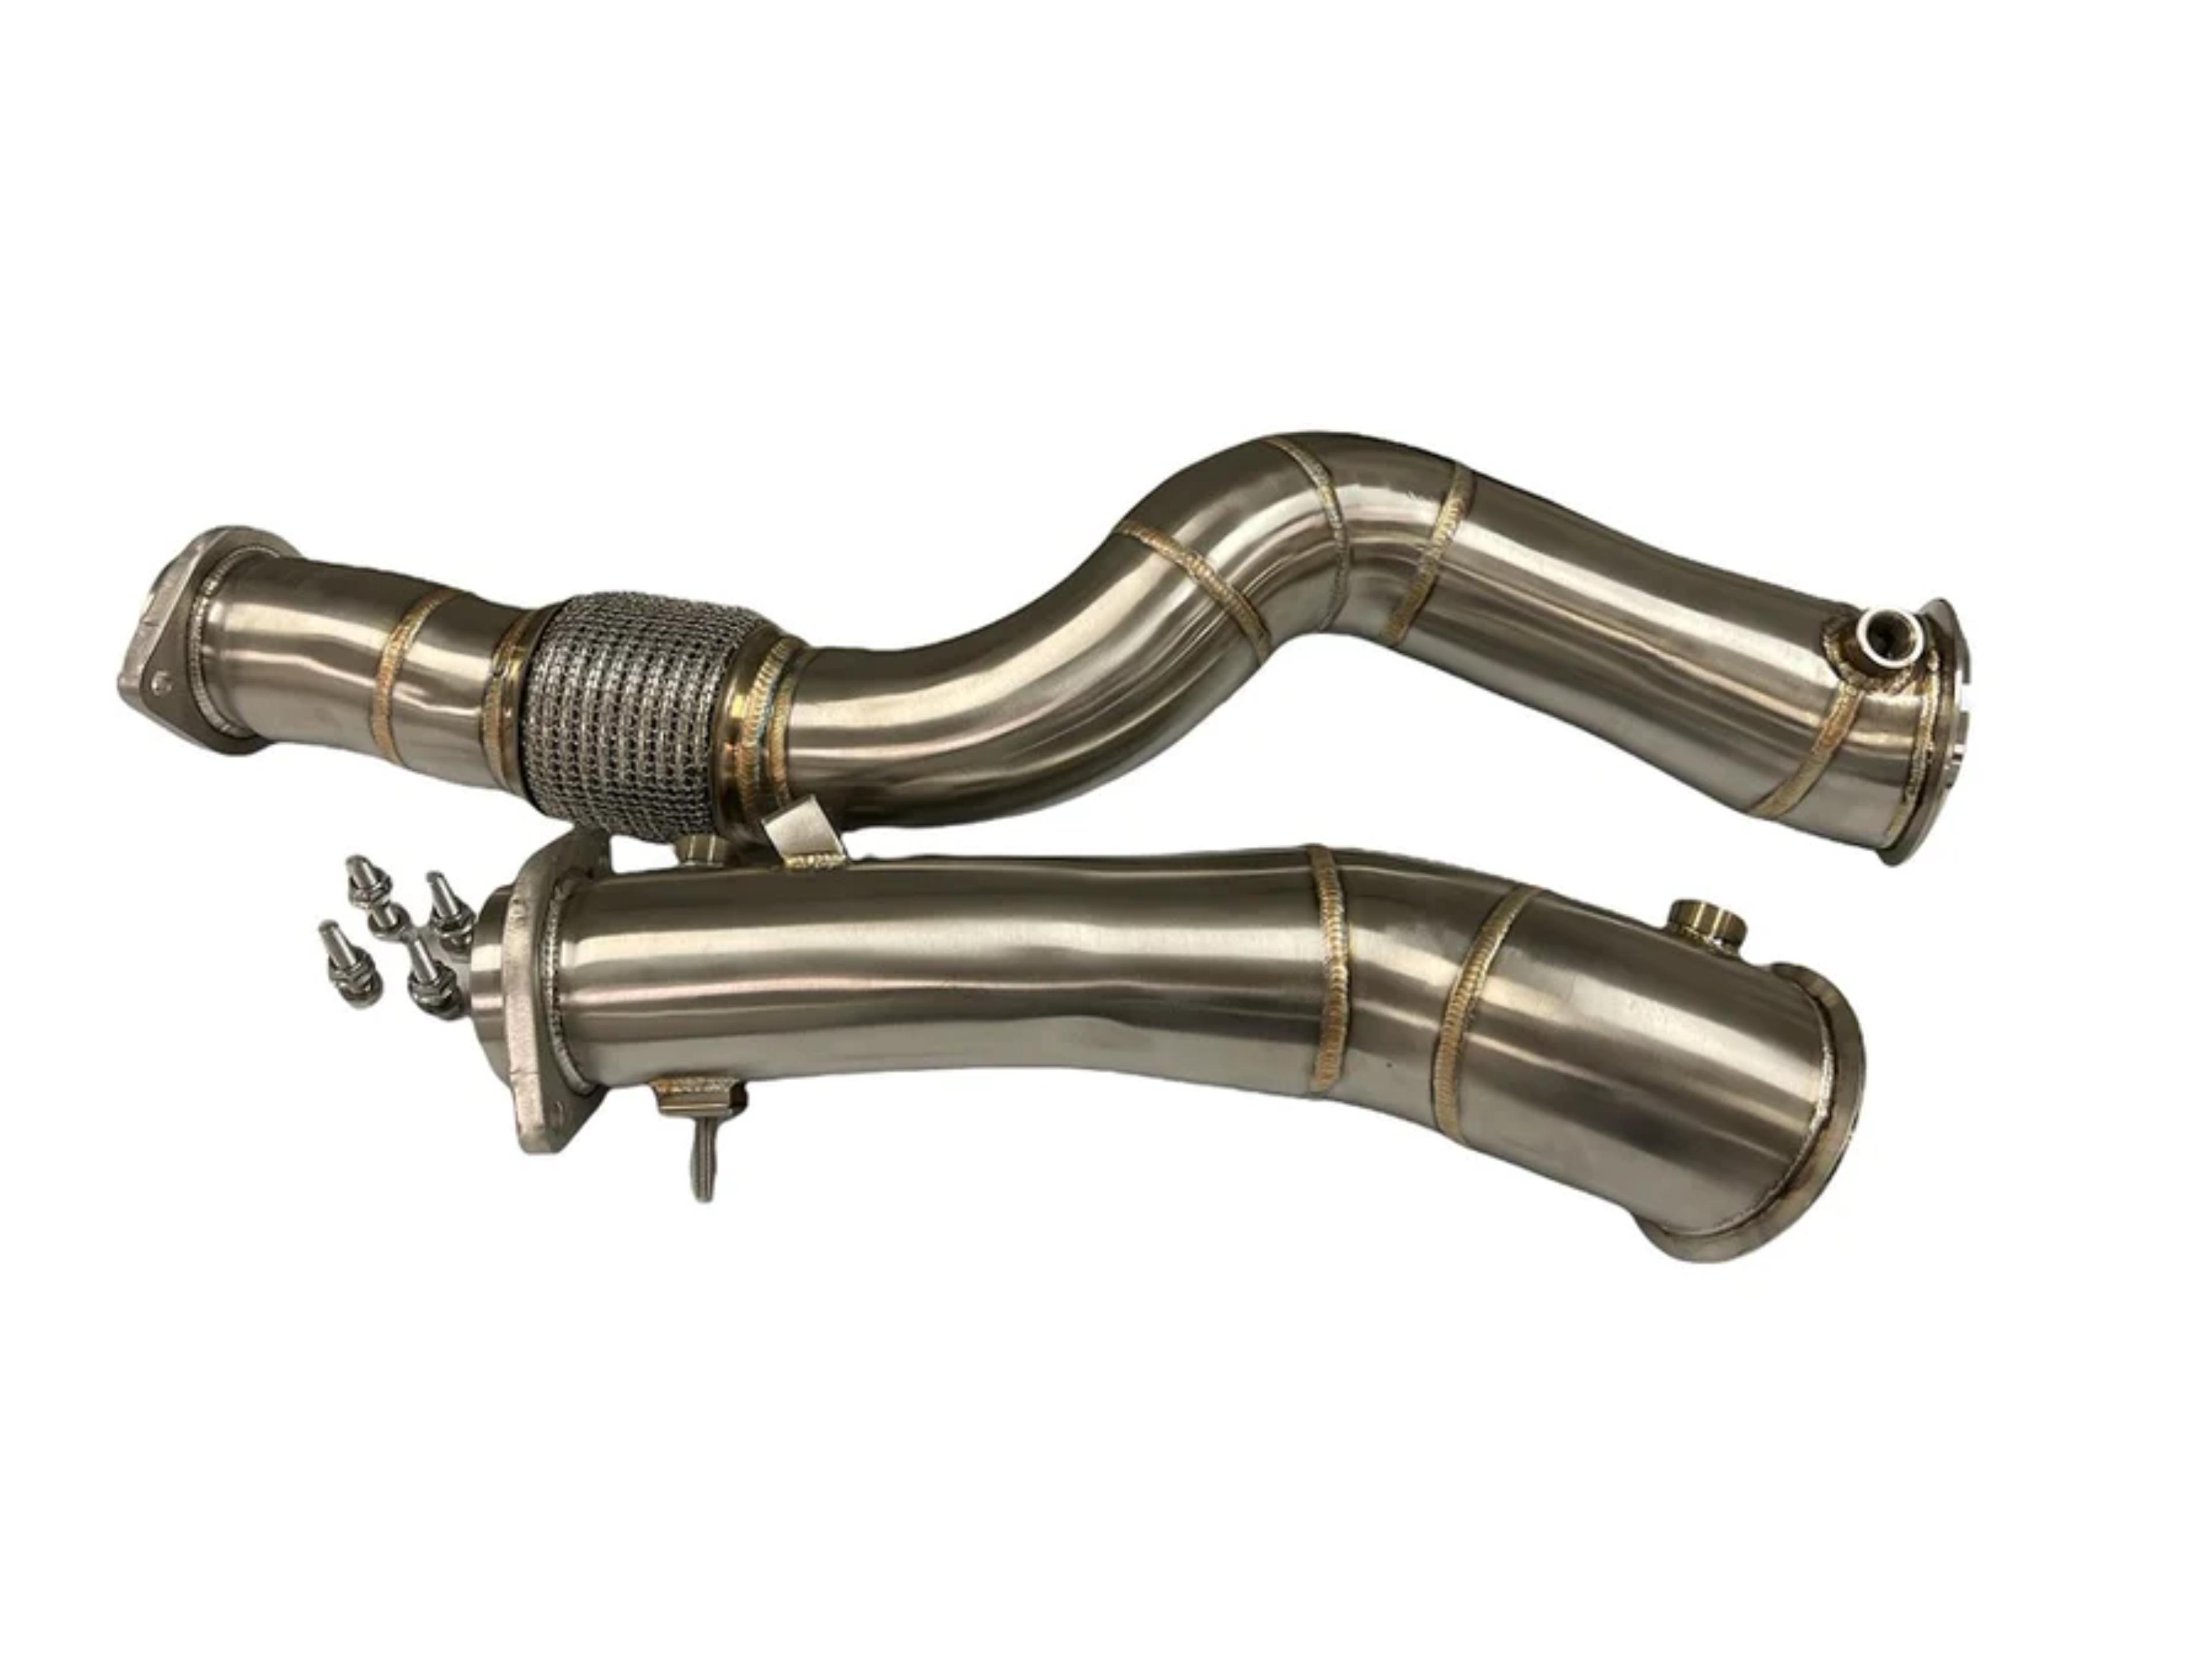 MAD S58 DOWNPIPES - G80 M3 | G82 / G83 M4